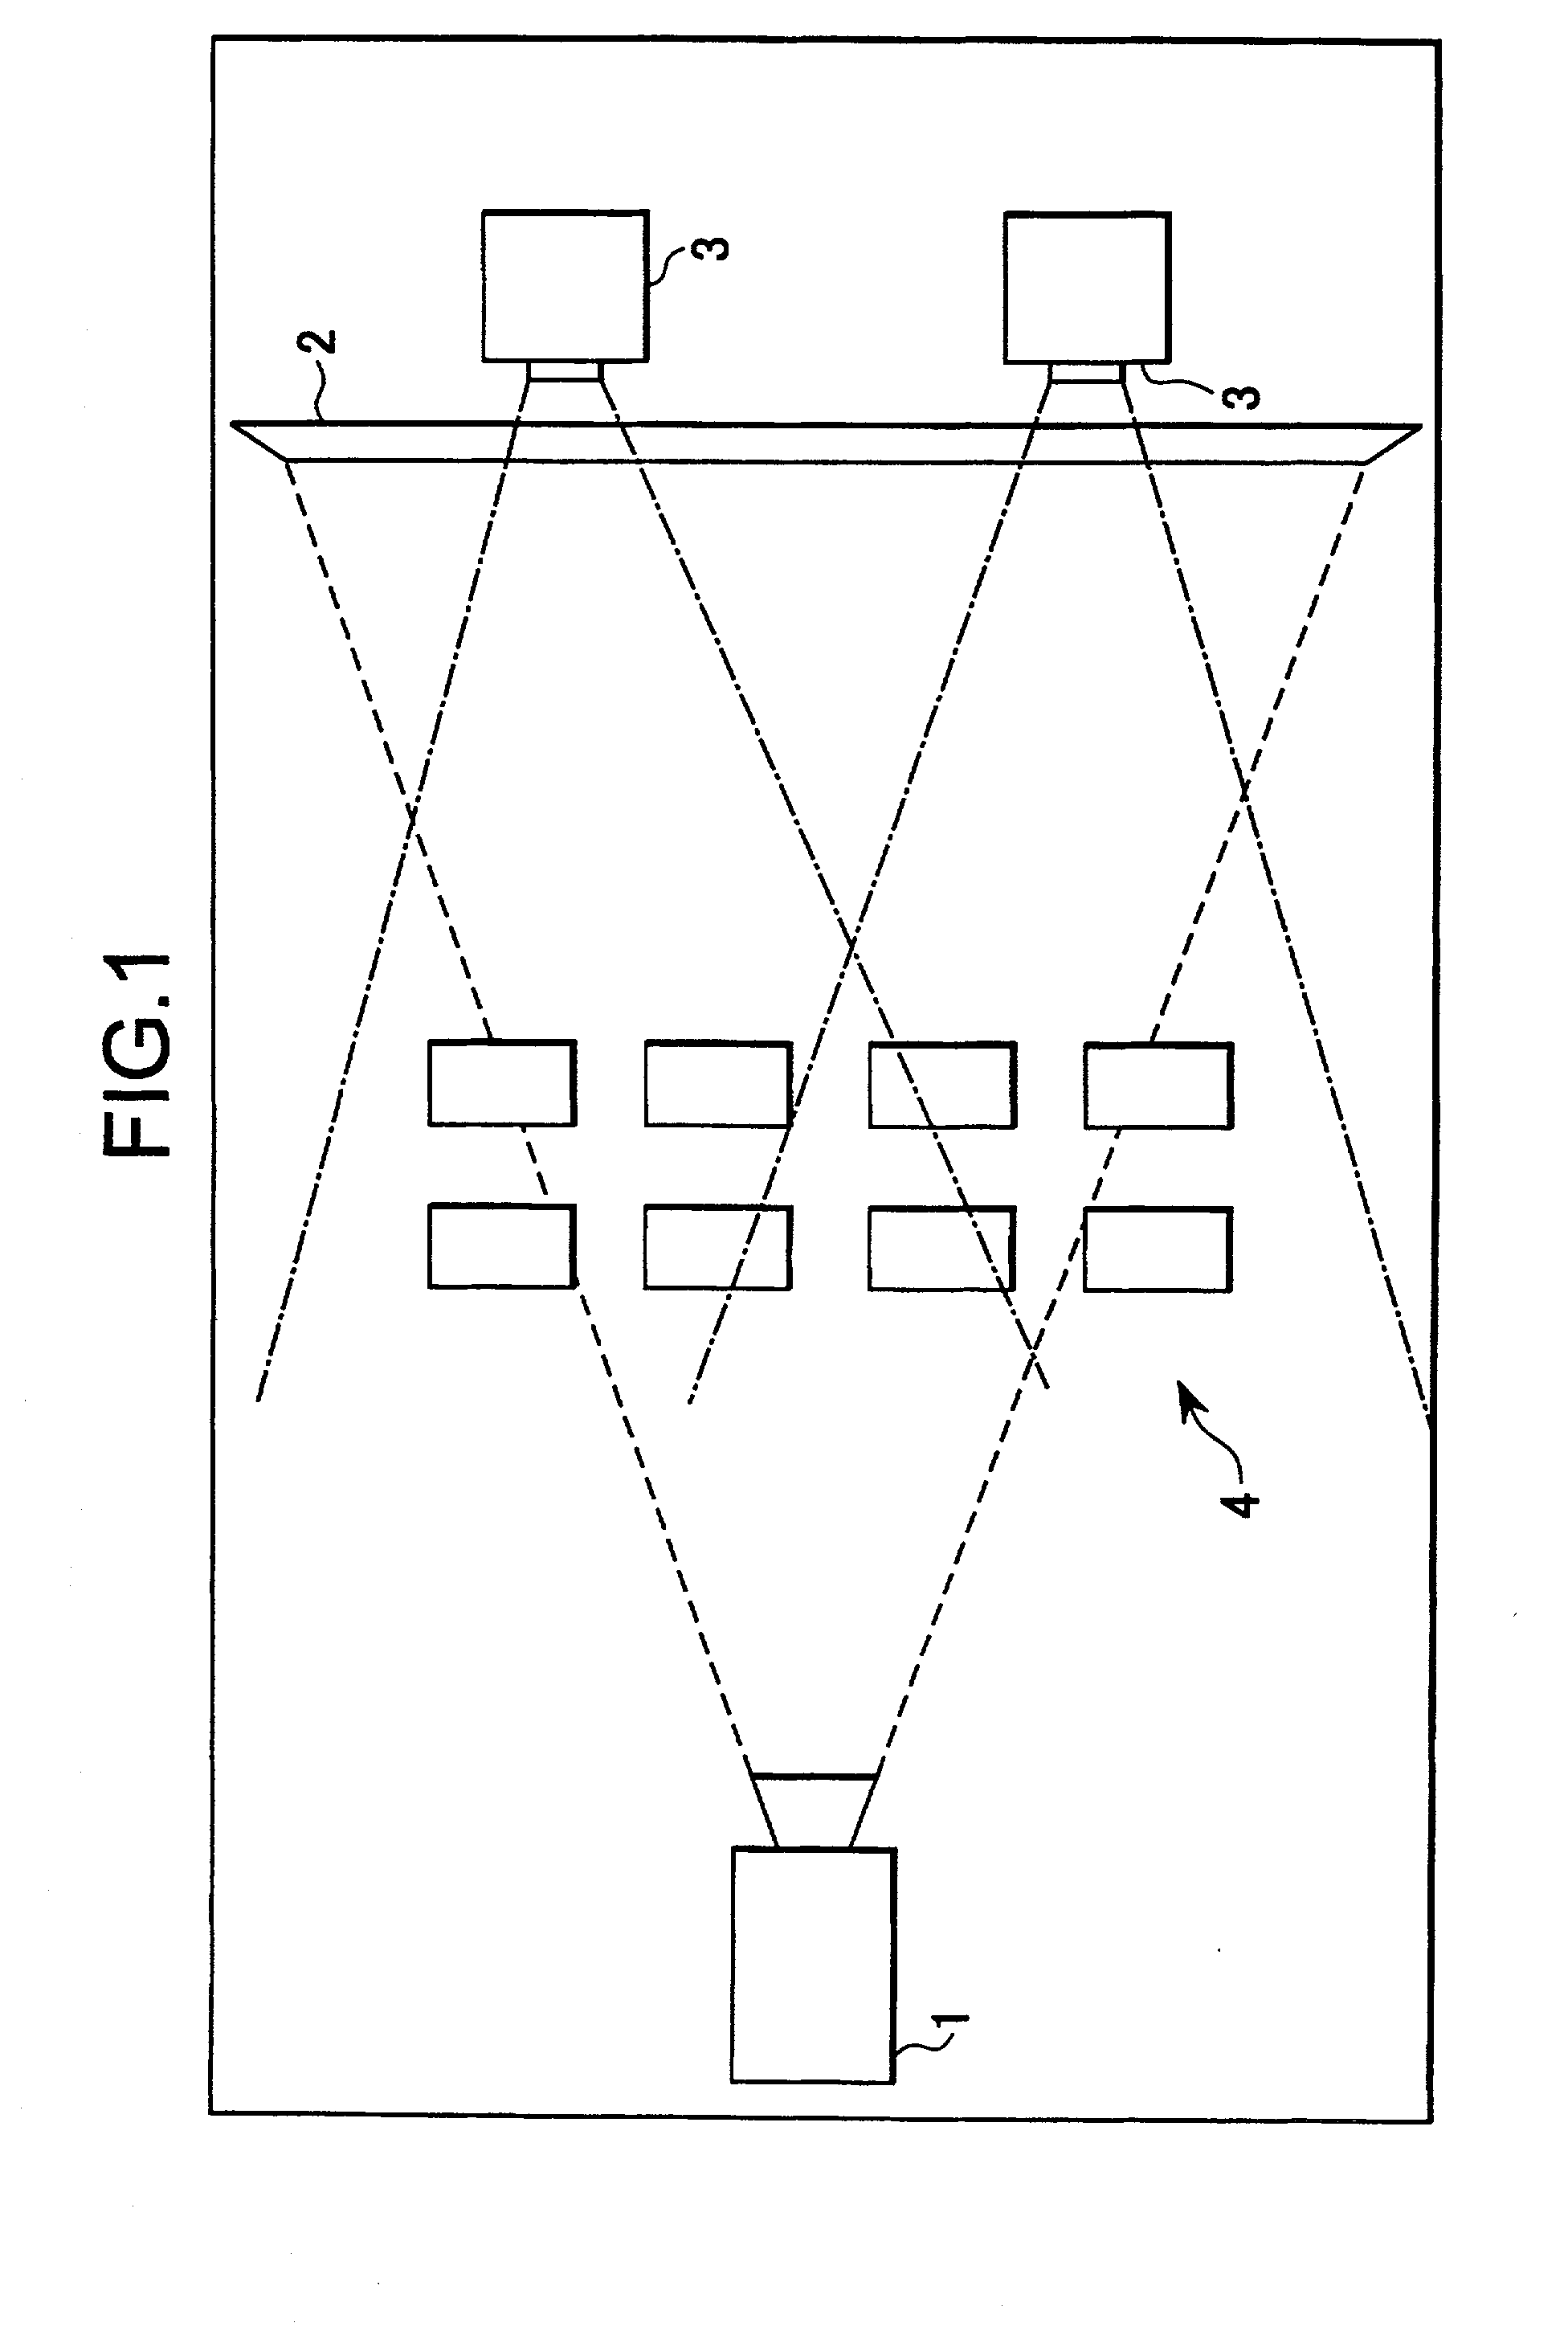 Imaging prevention method and system